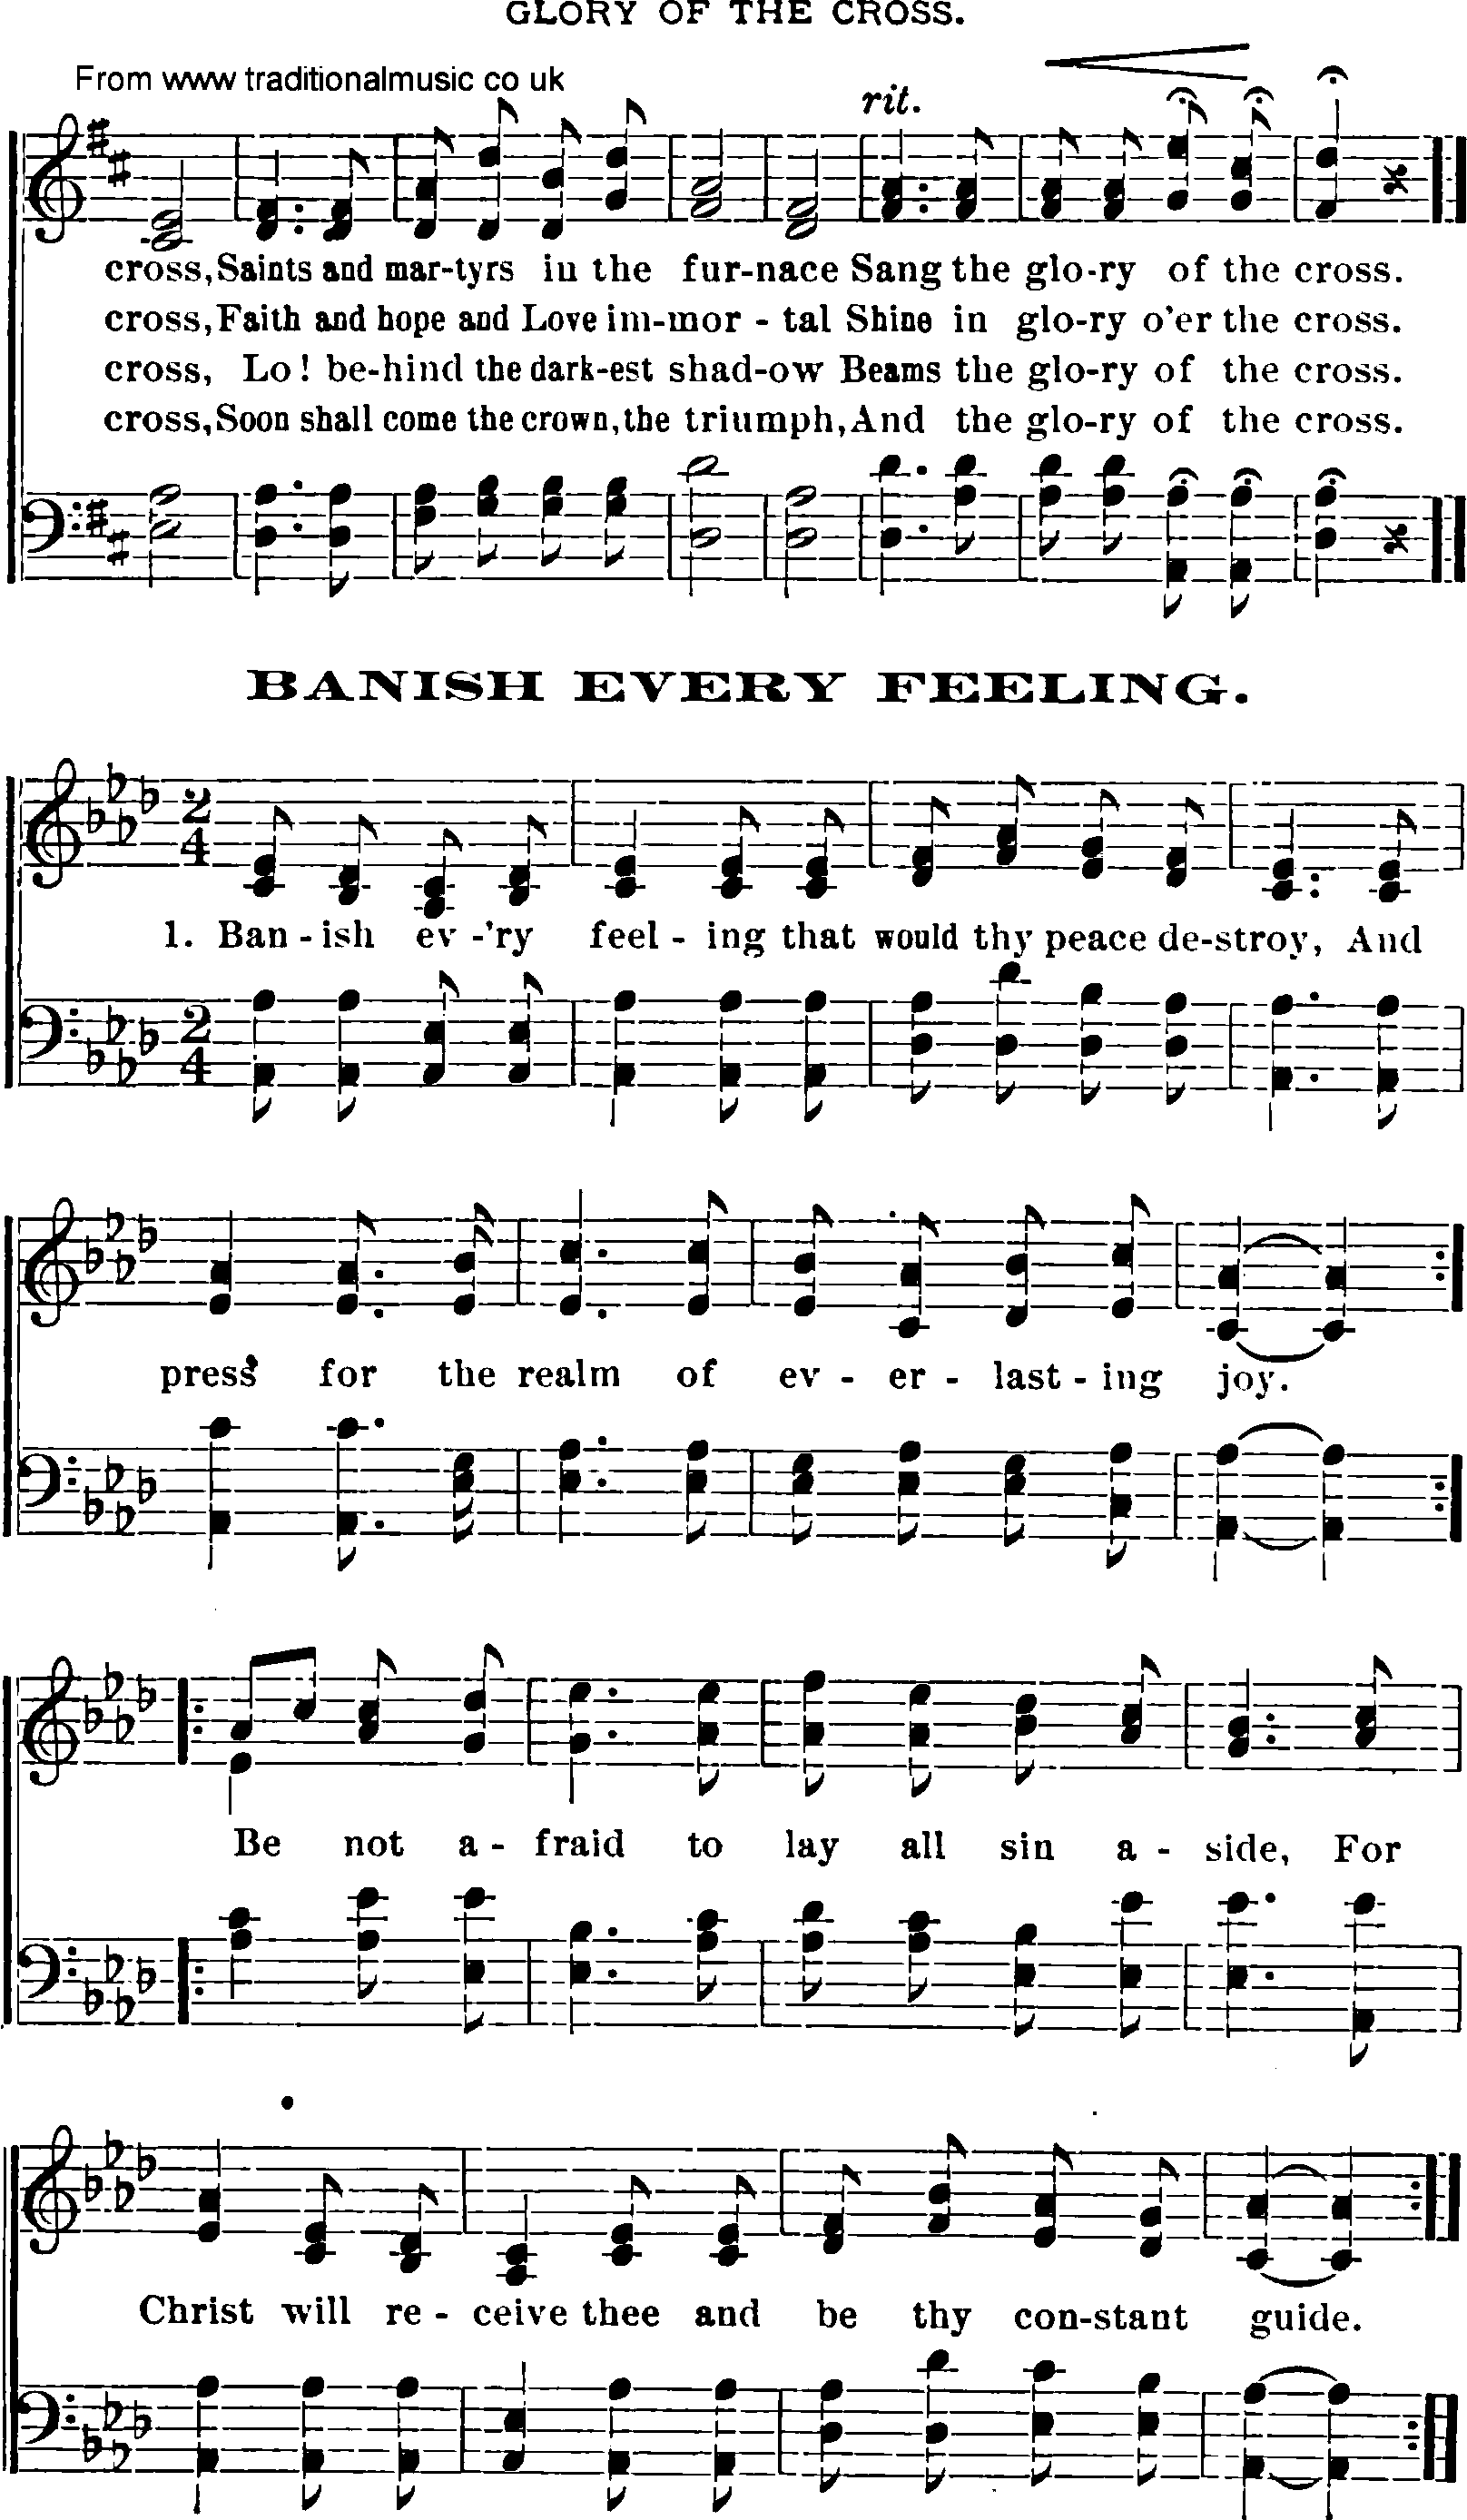 Shaker Music collection, Hymn: banish every feeling, sheetmusic and PDF